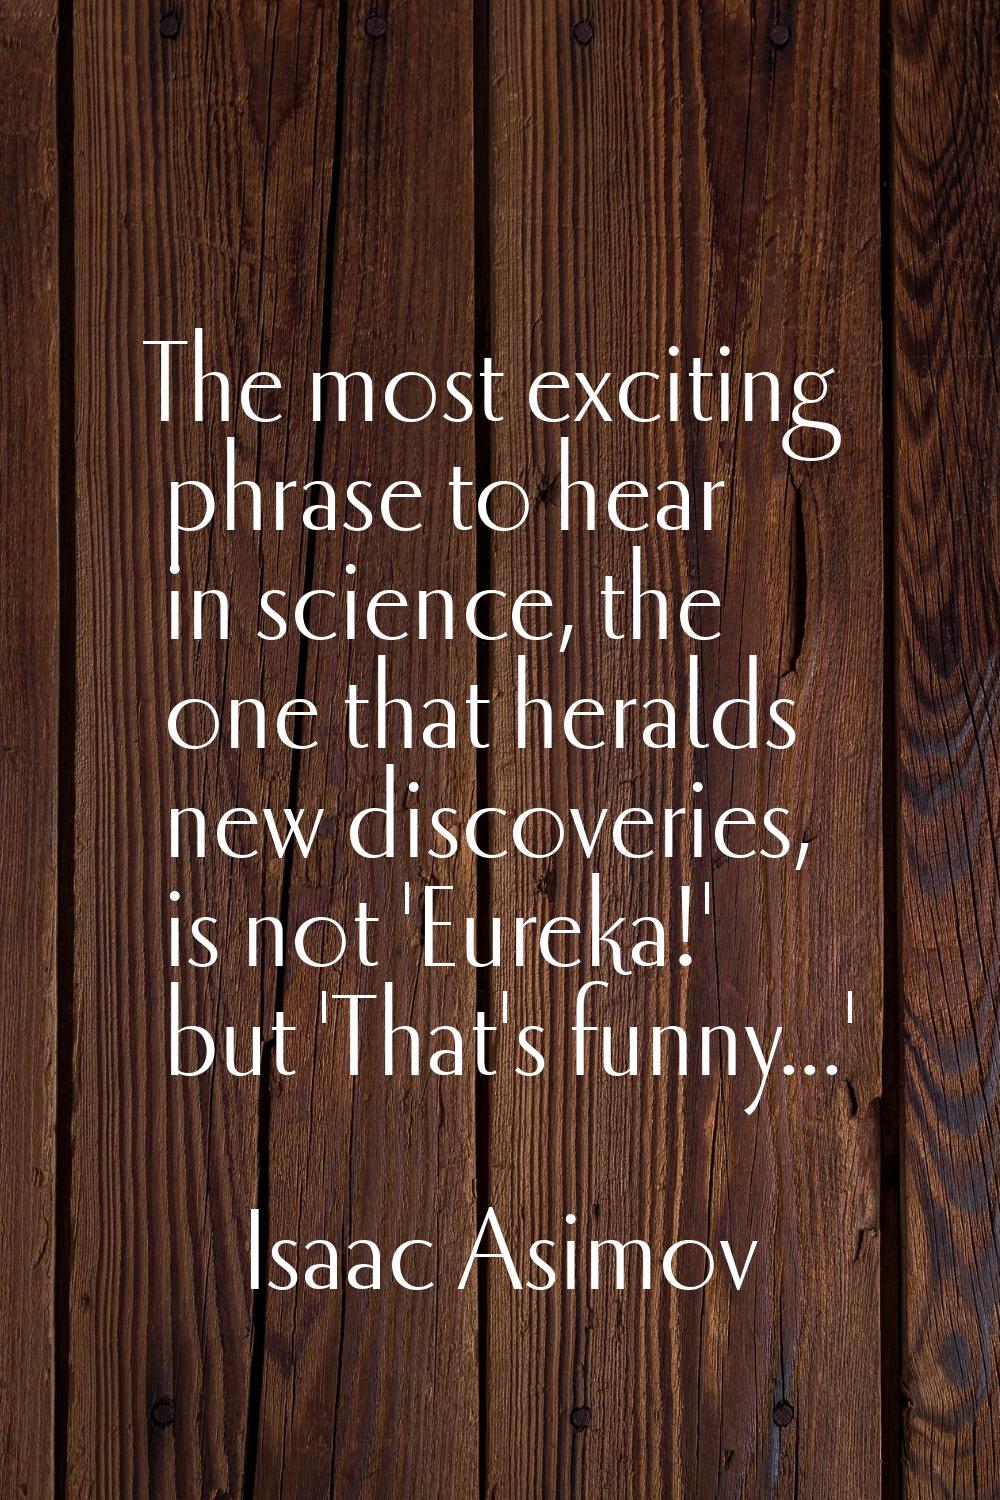 The most exciting phrase to hear in science, the one that heralds new discoveries, is not 'Eureka!'